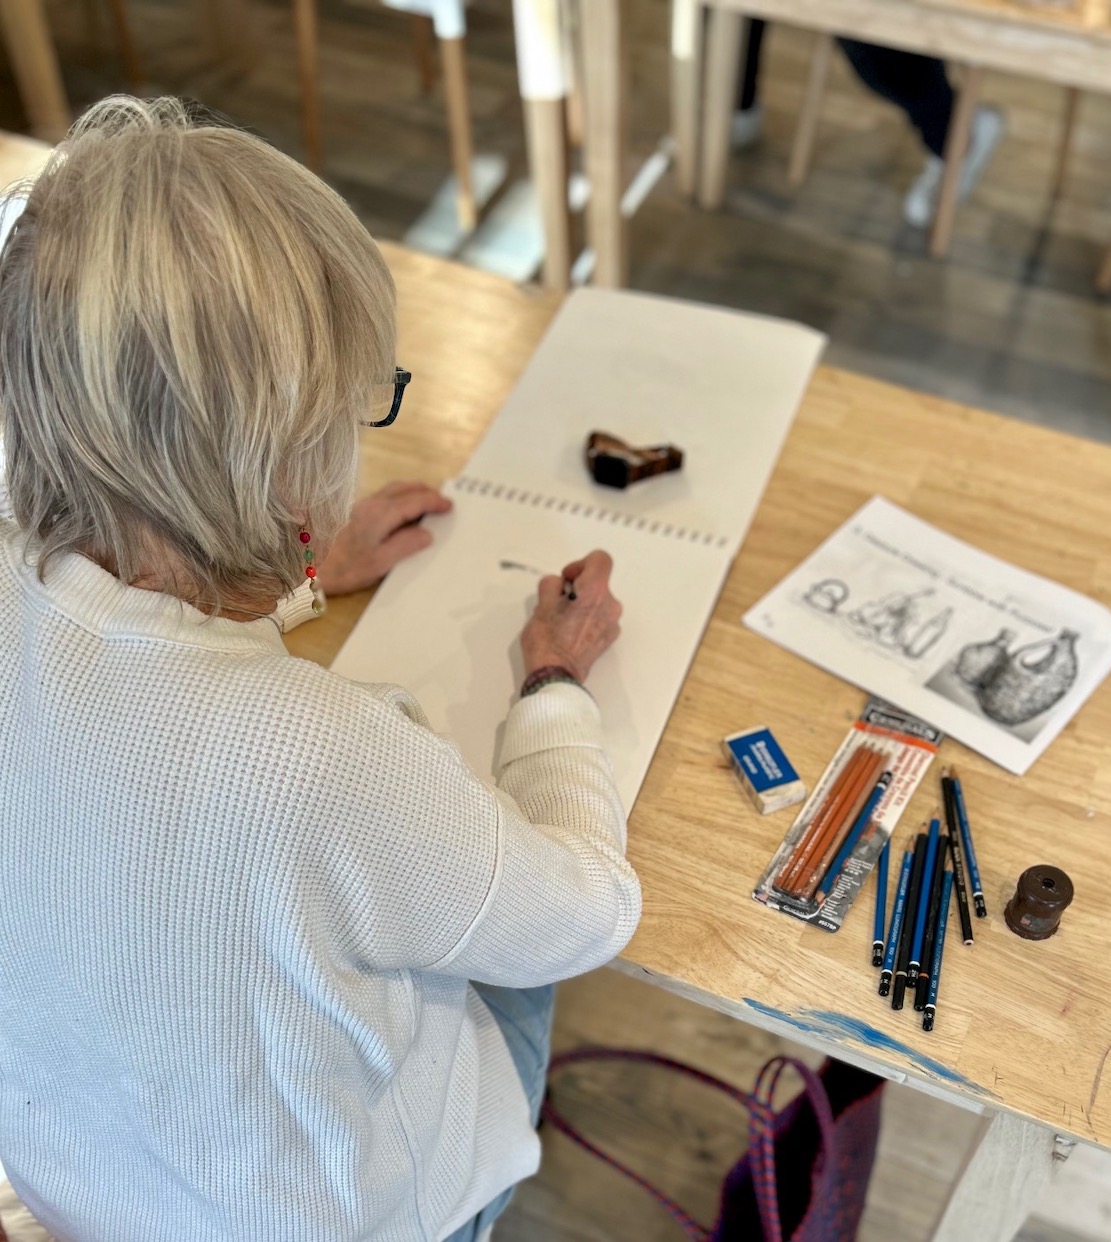 Over the shoulder of a woman sketching with drawing supplies on a table